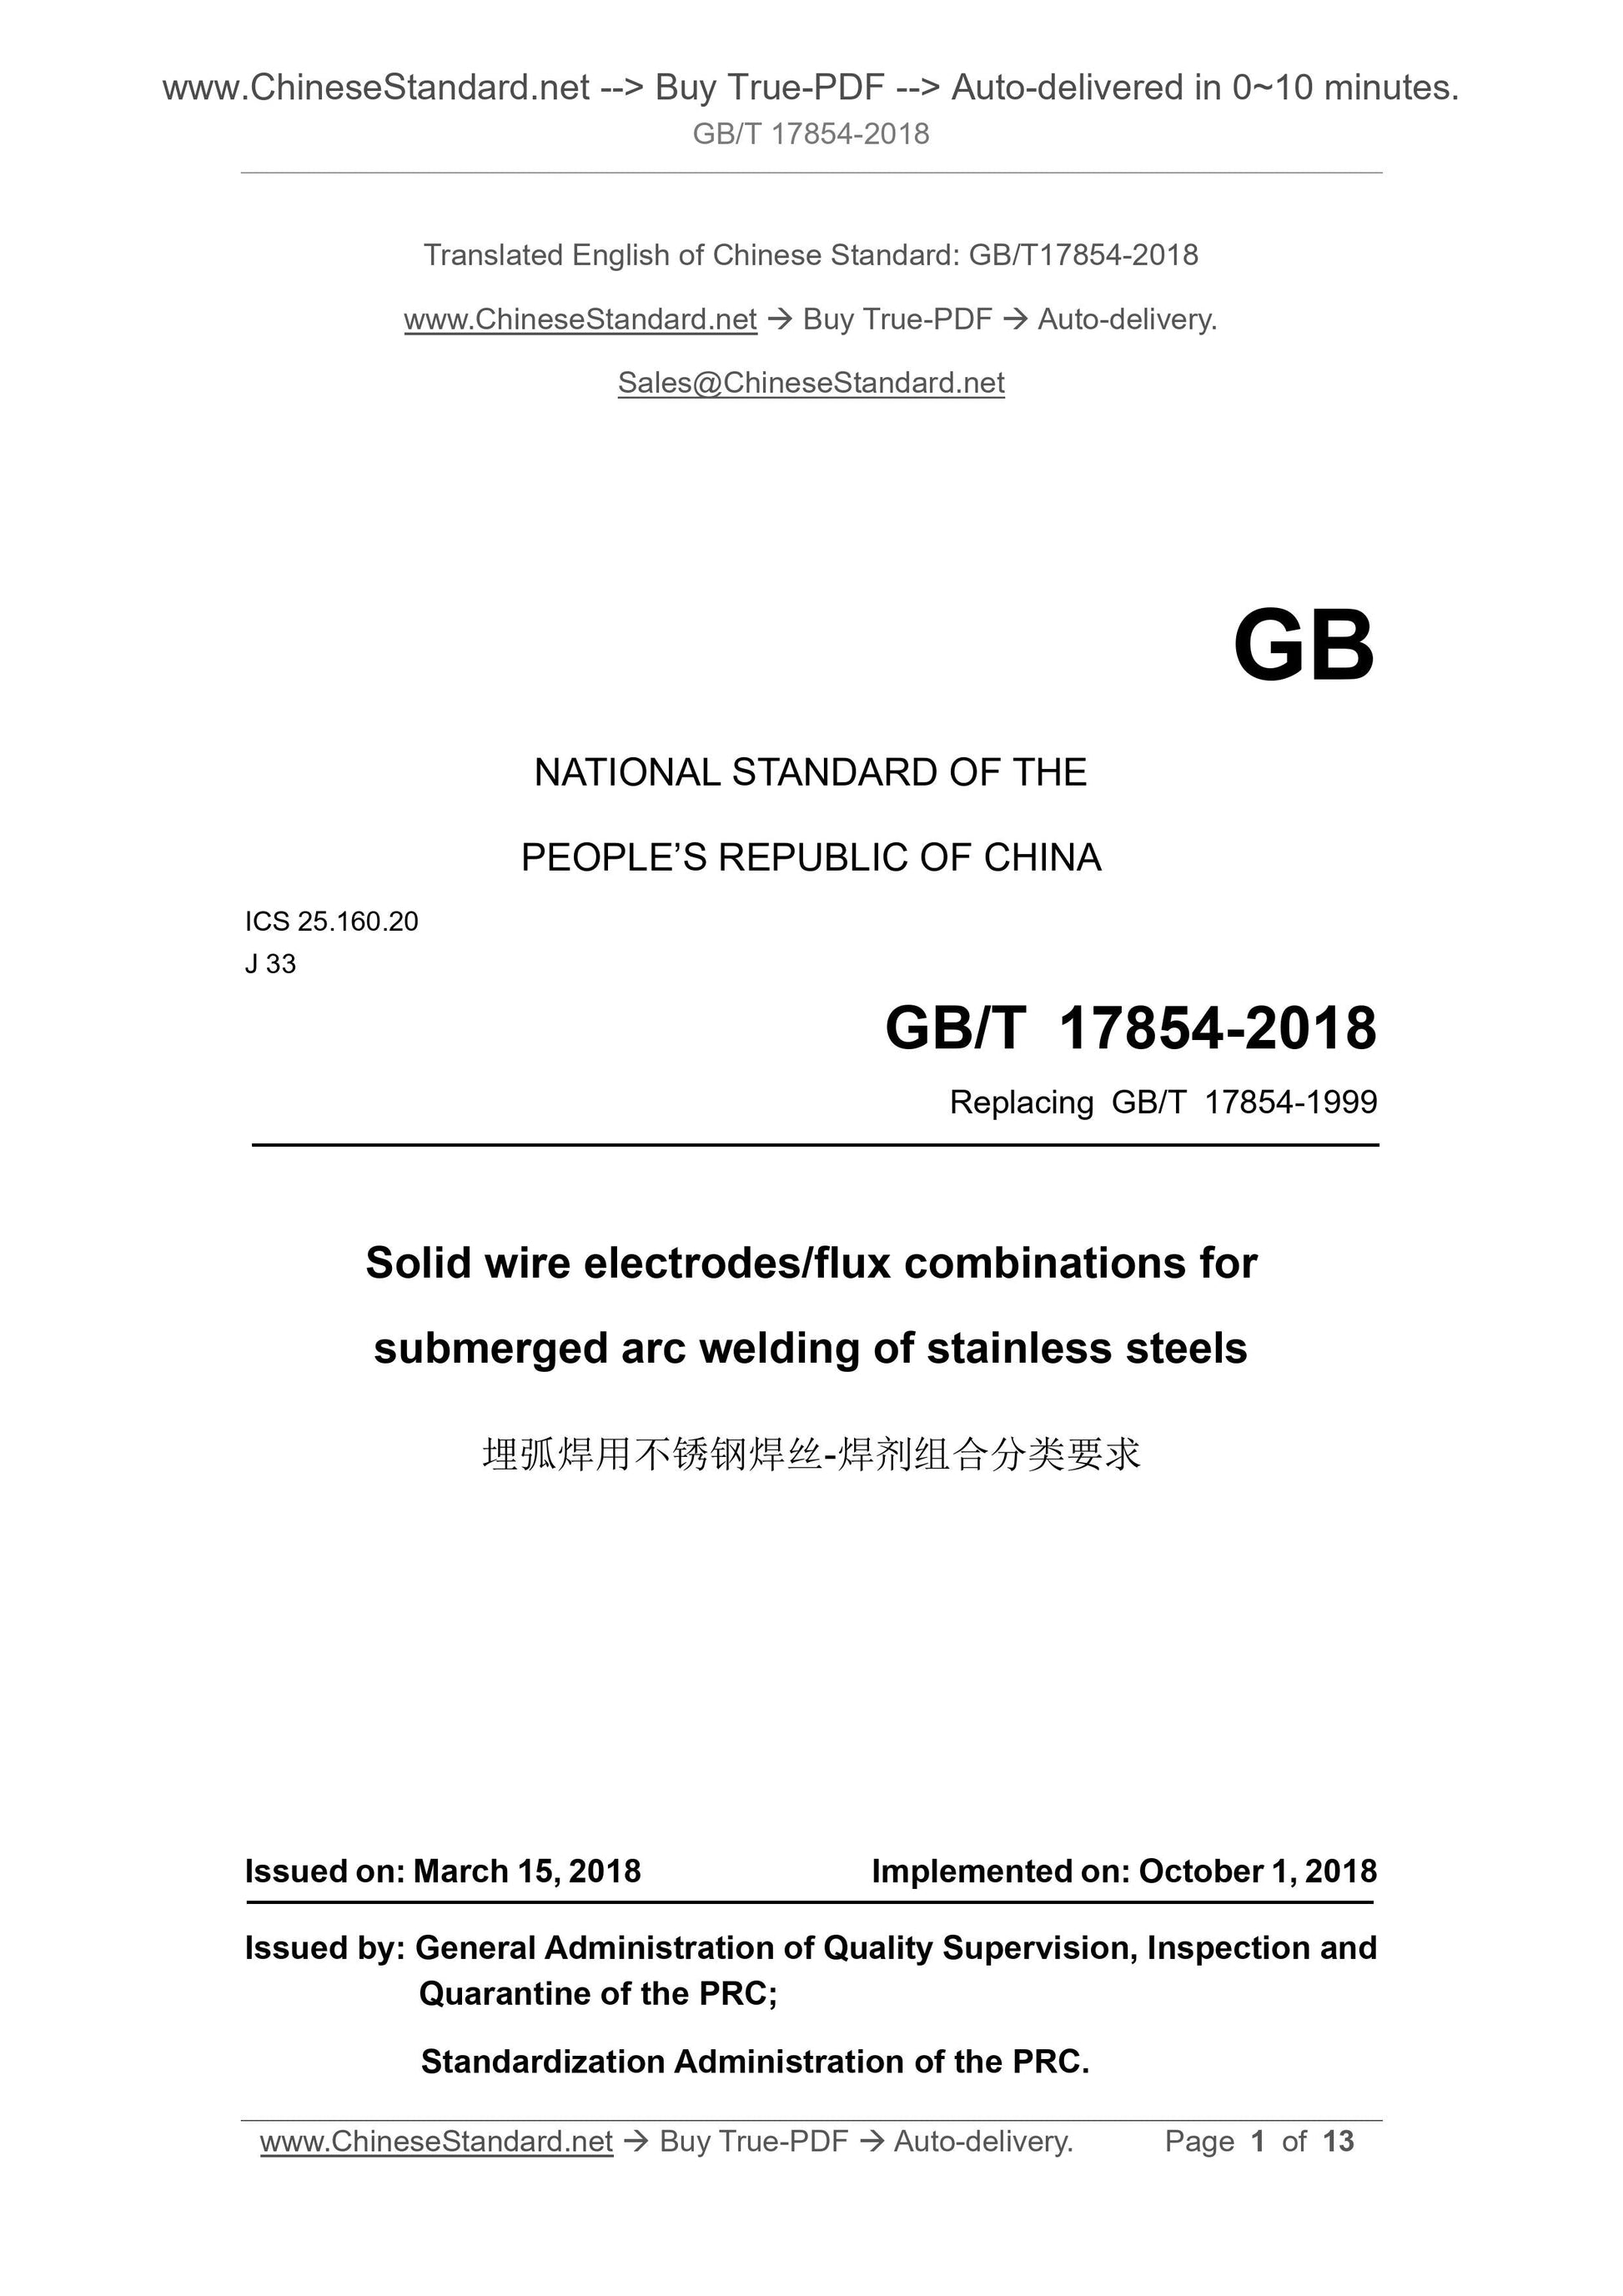 GB/T 17854-2018 Page 1